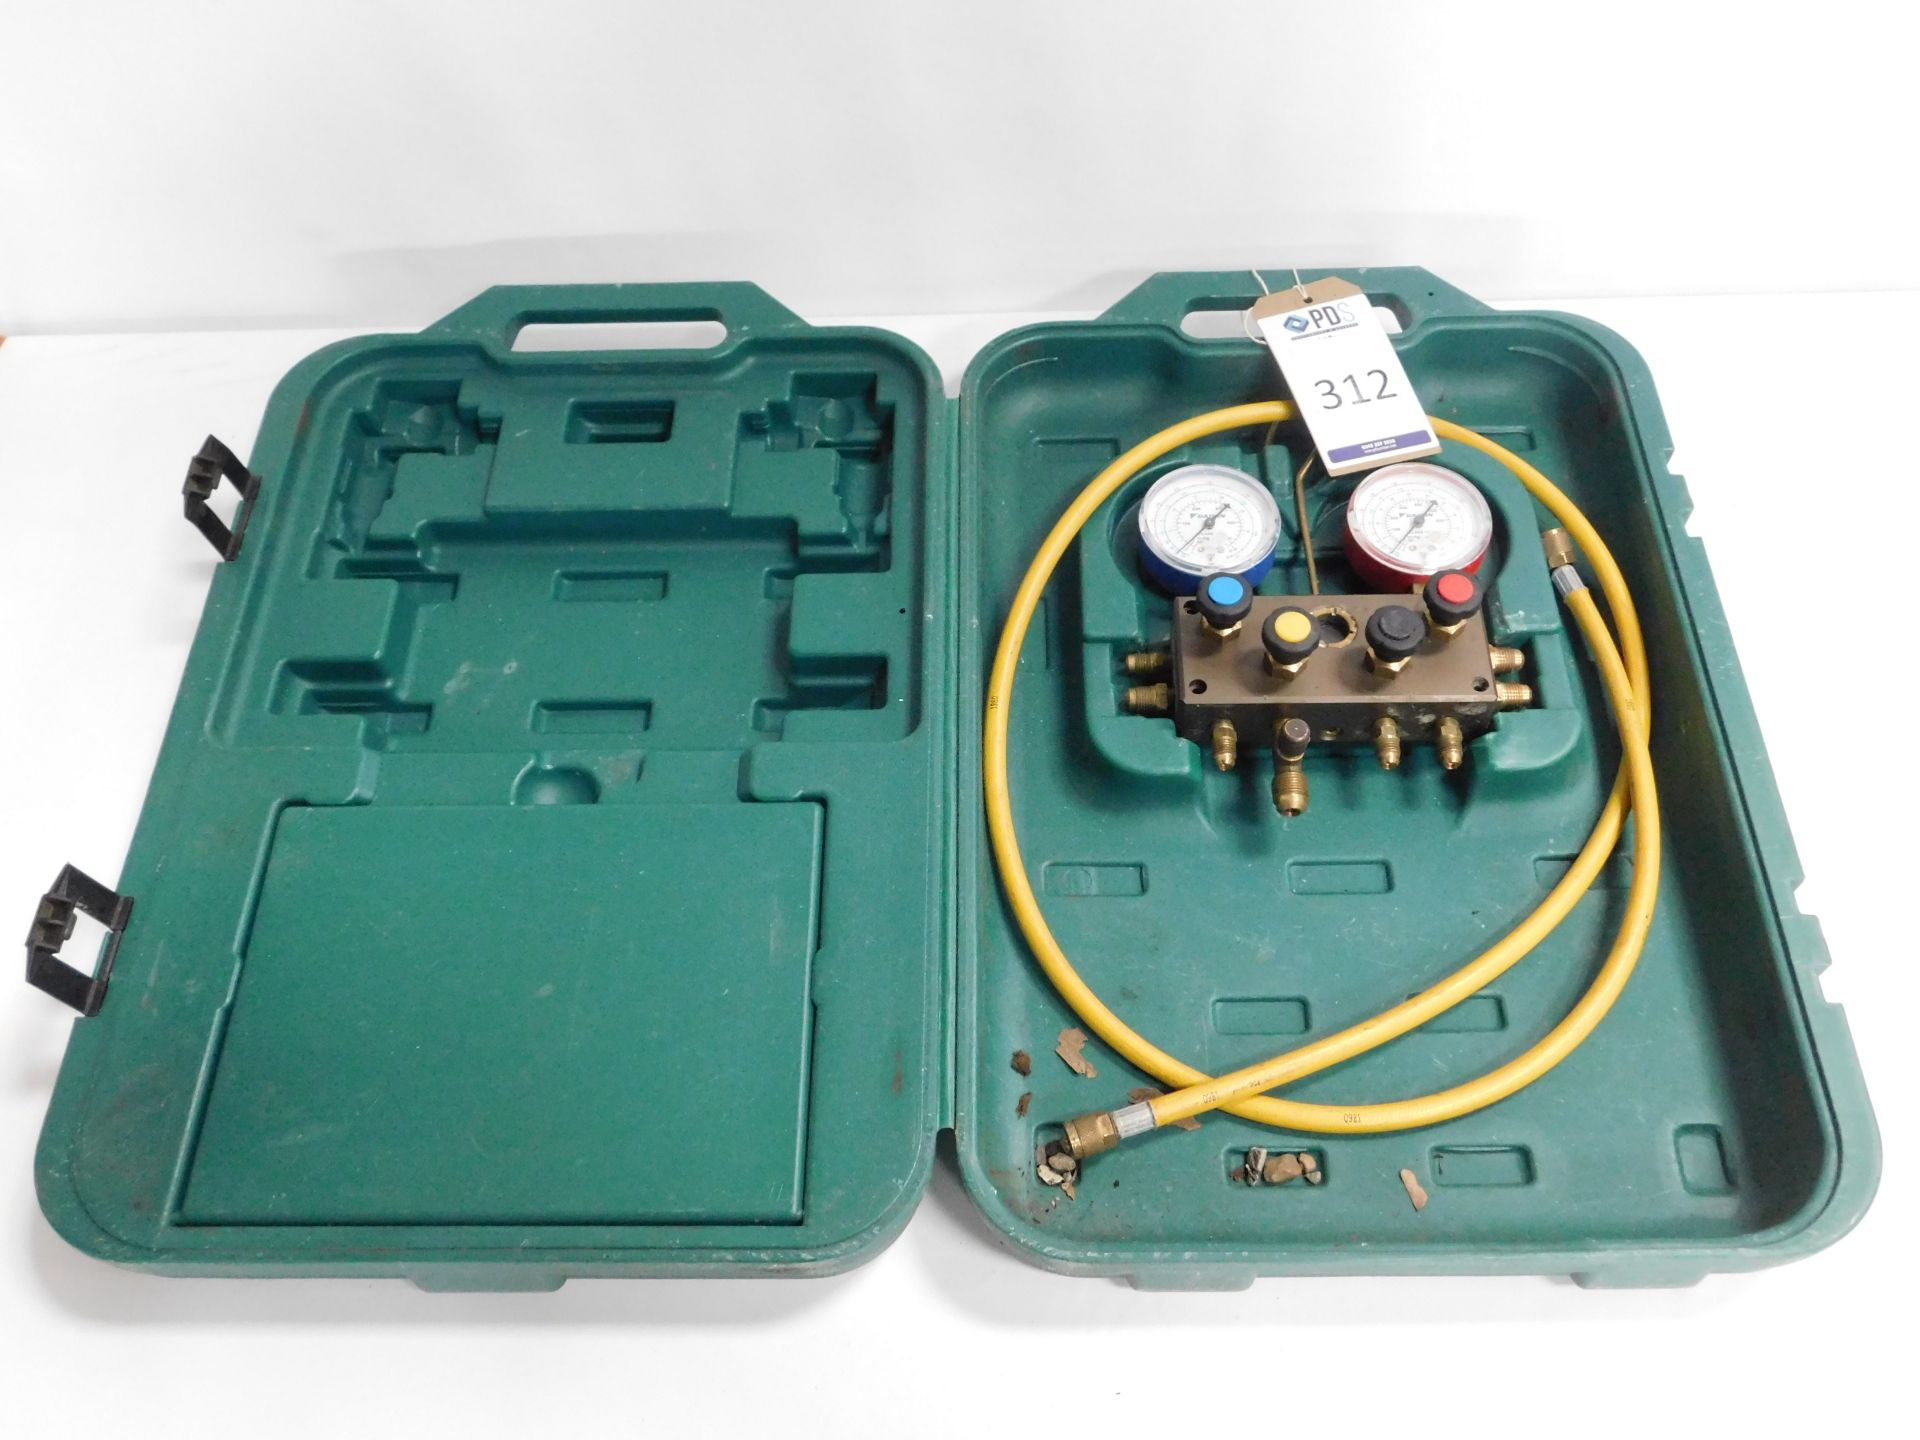 REFCO 4 Way Manifold Set Dual Scale Gauges (Missing Charging Lines) (Location Brentwood. Please